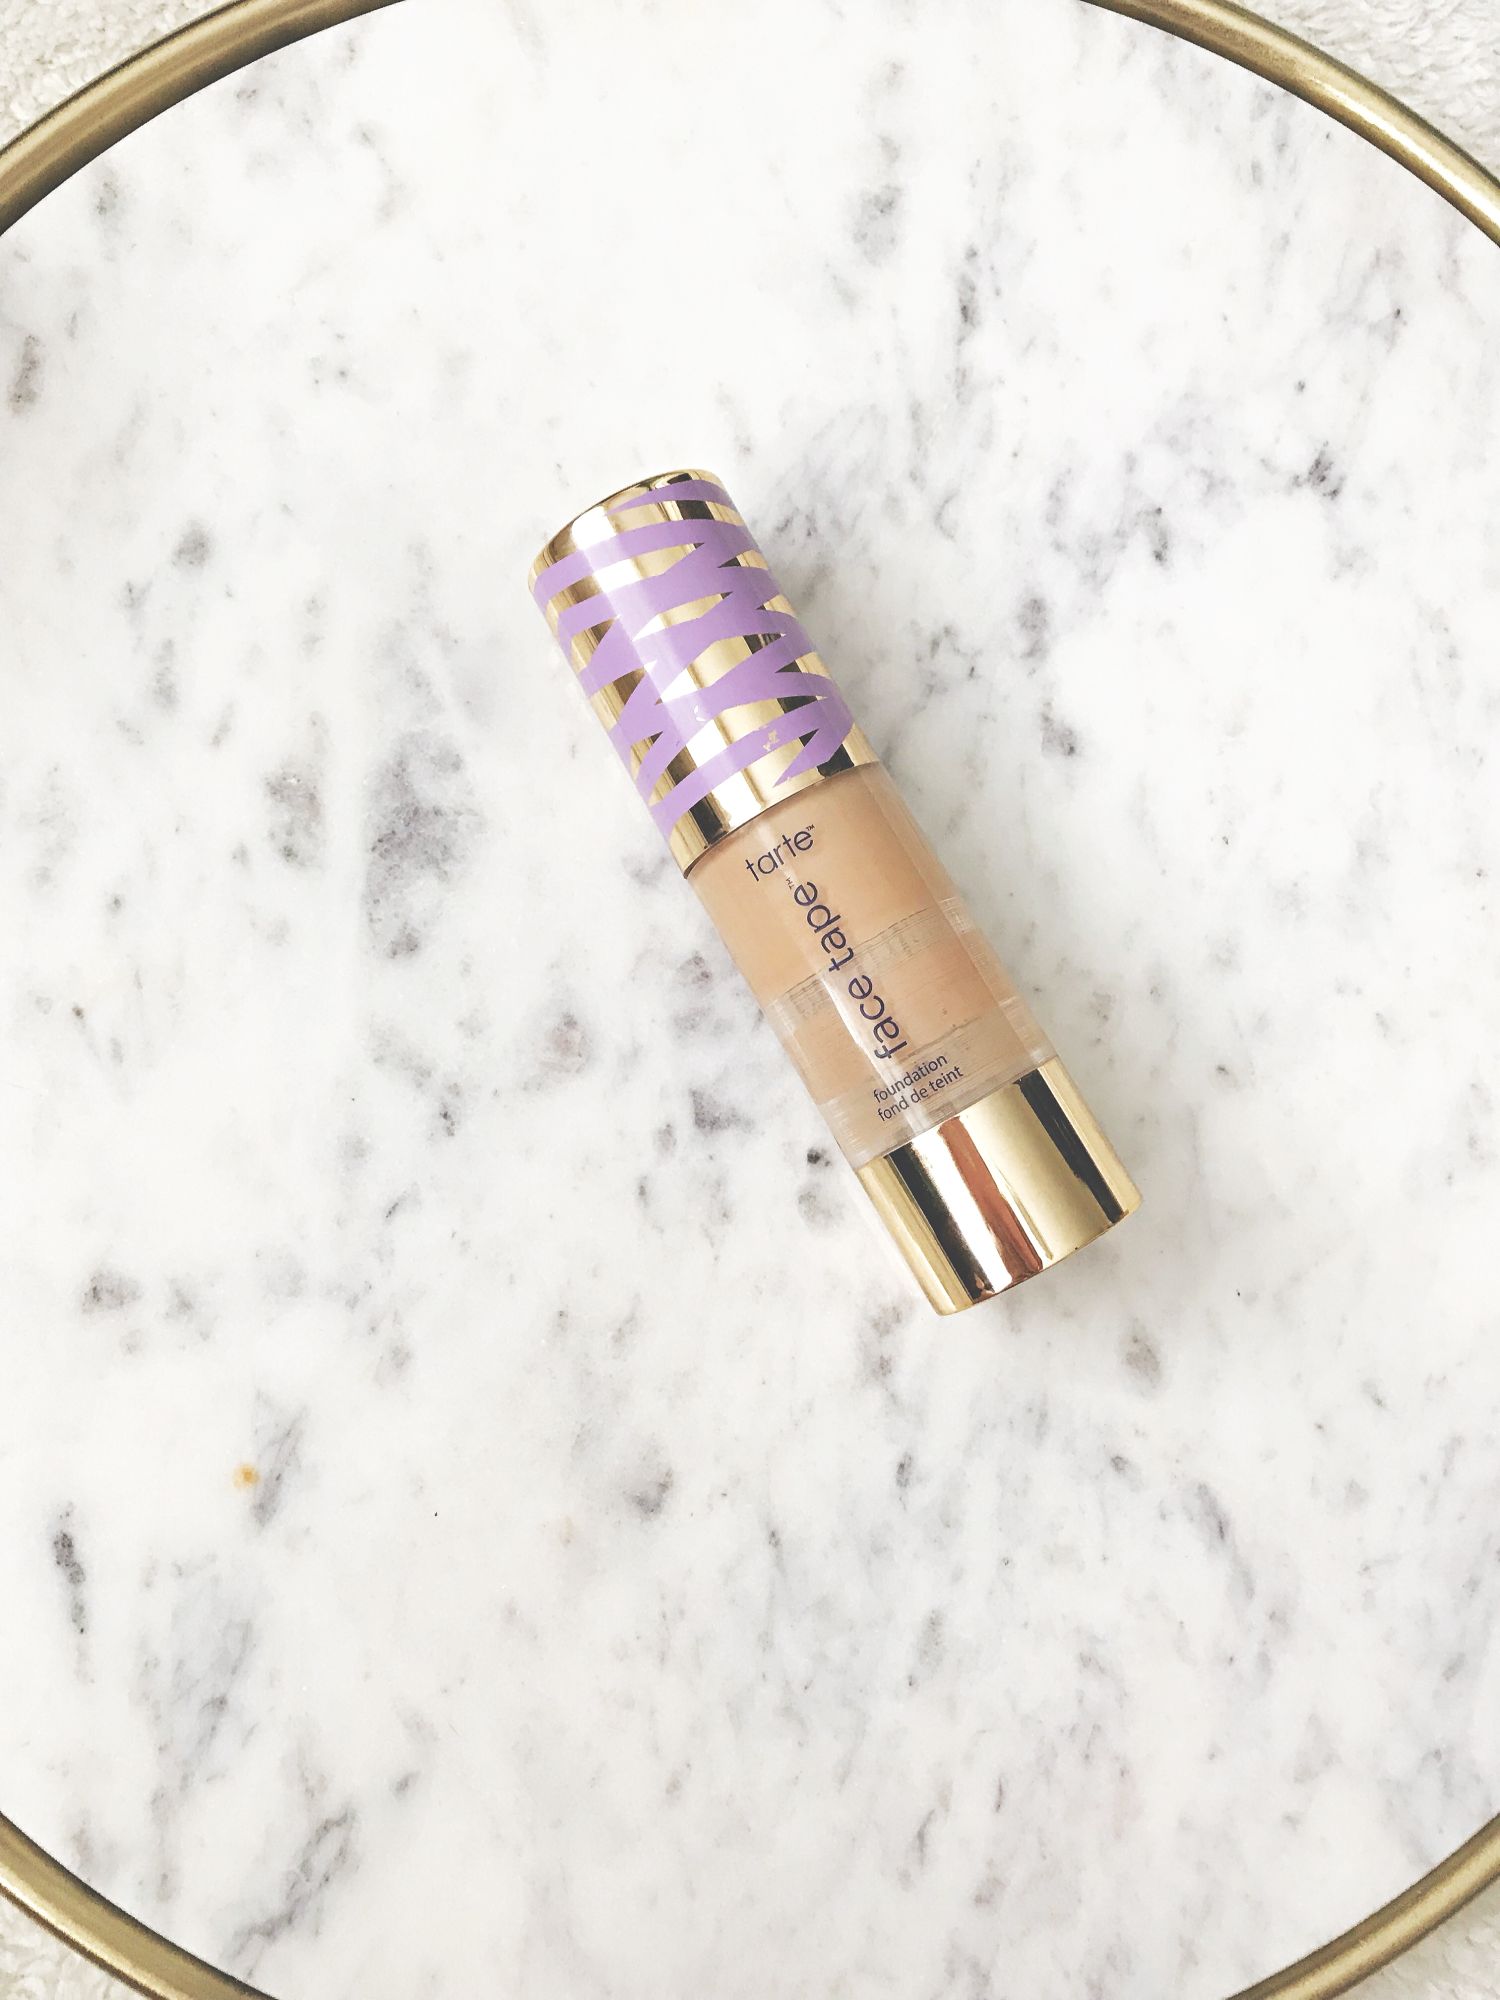 STH 6 Beauty Products I'm Loving: Tarte Face Tape Foundation 